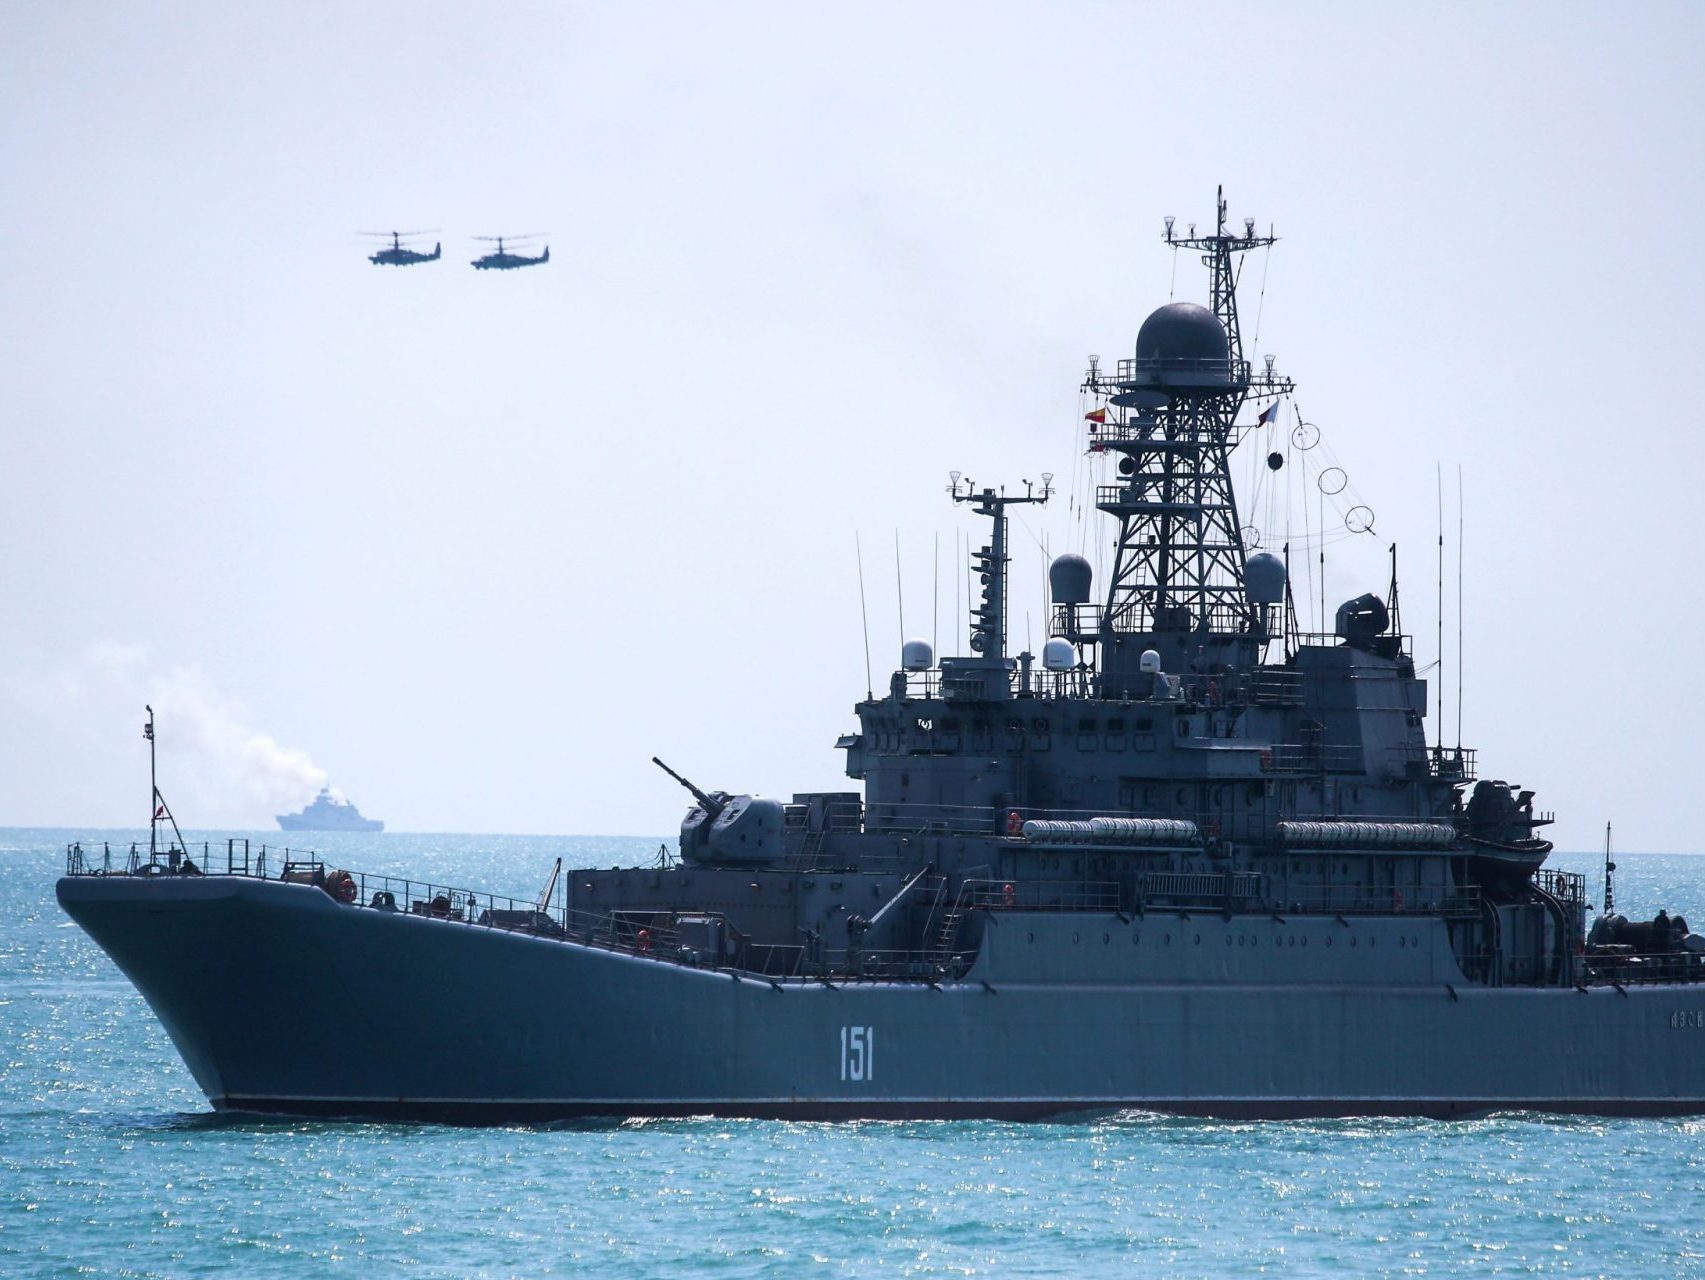 Enhancing security in the Black Sea The future of security cooperation